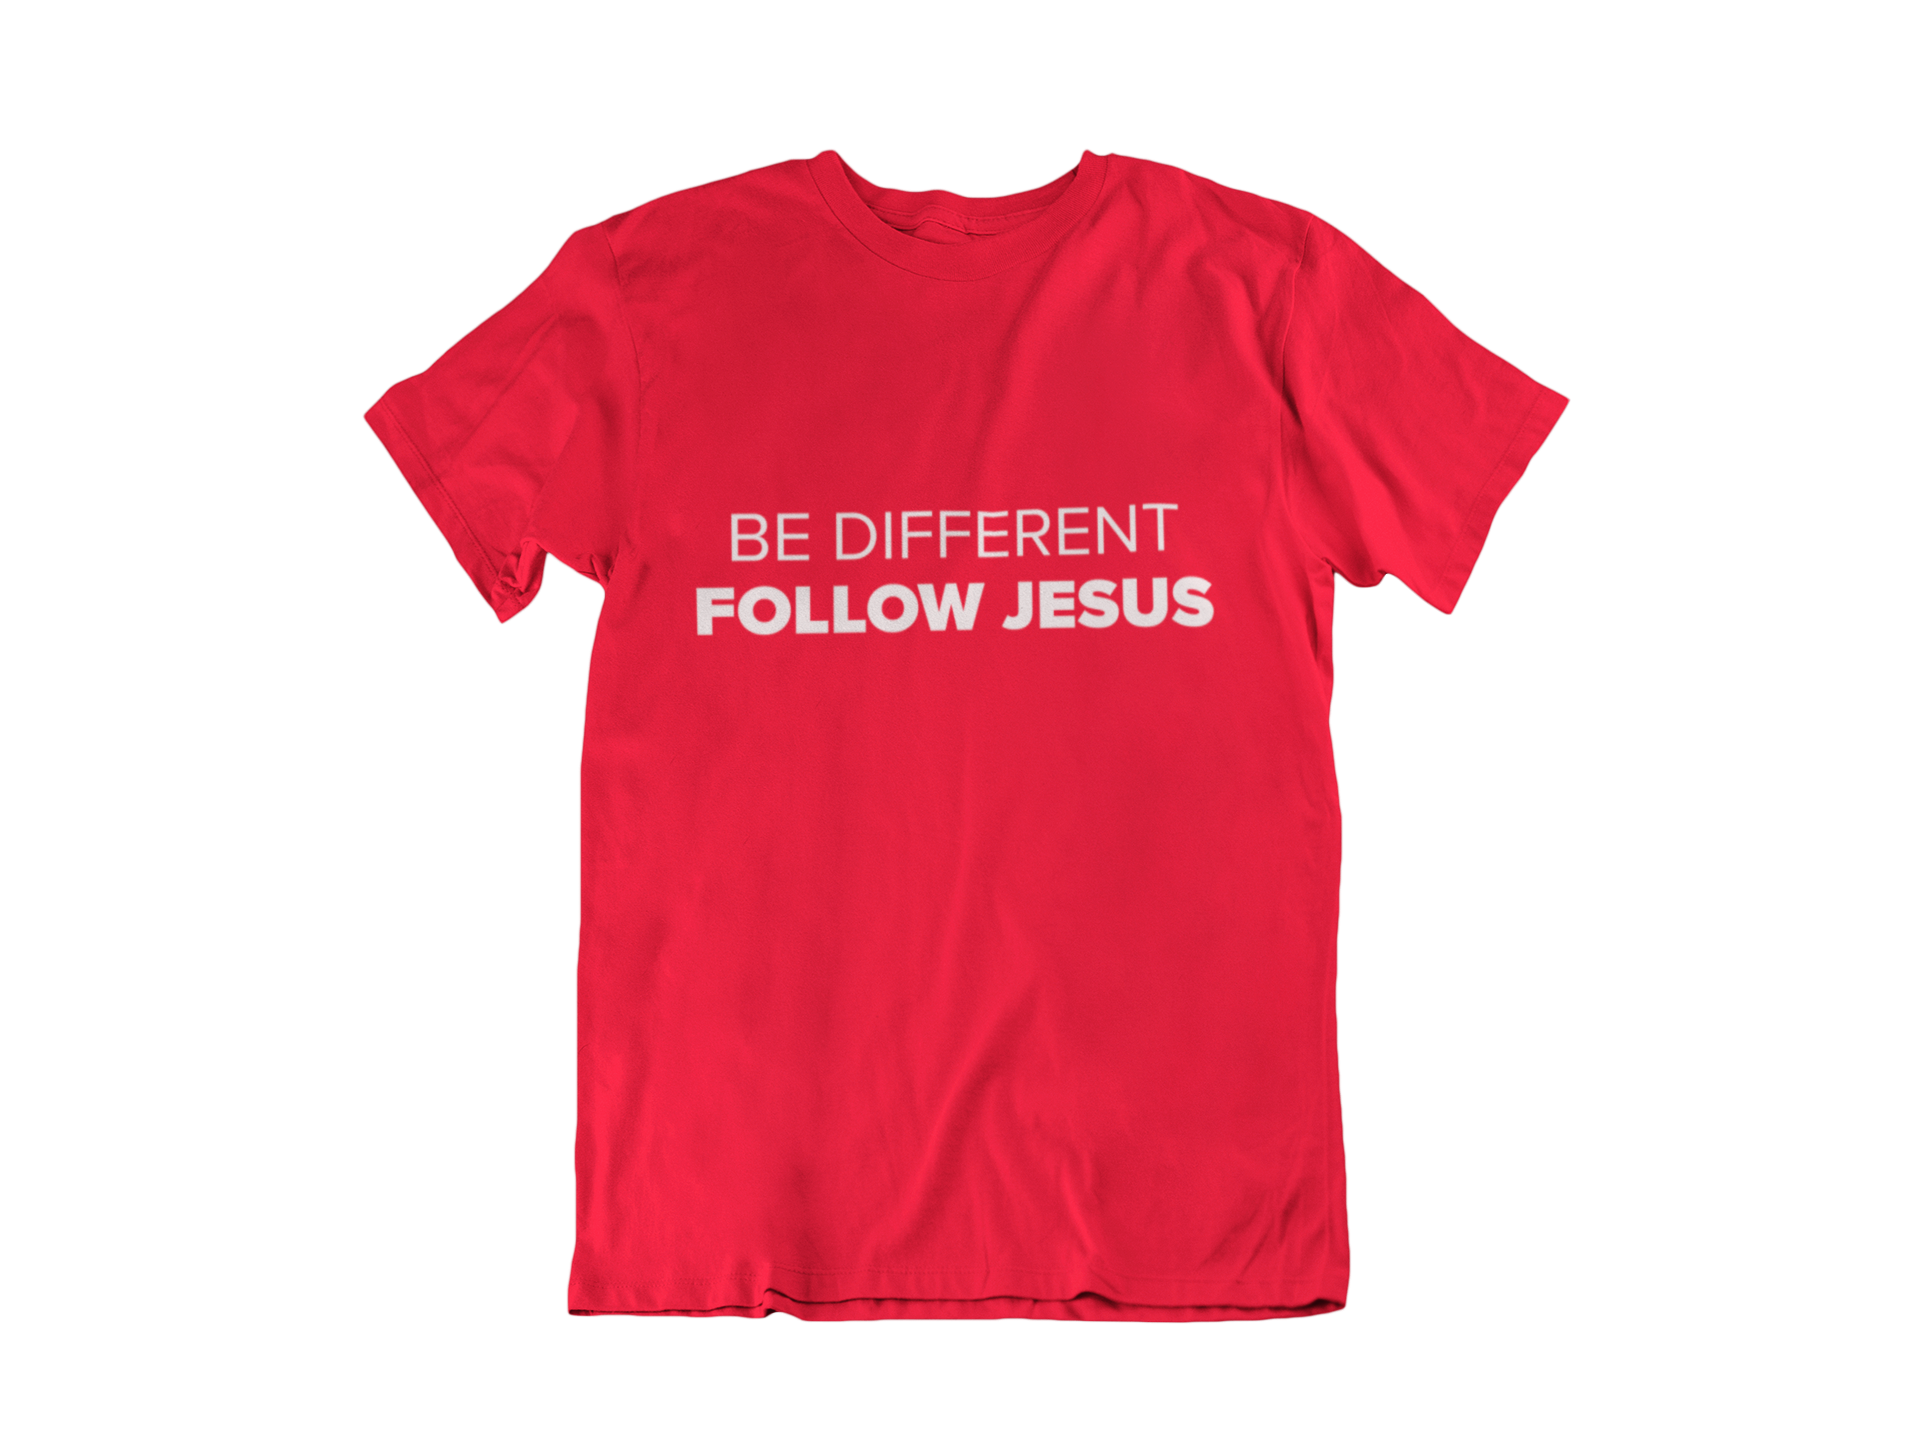 BE DIFFERENT FOLLOW JESUS RED - CHRISTIAN CLOTHING